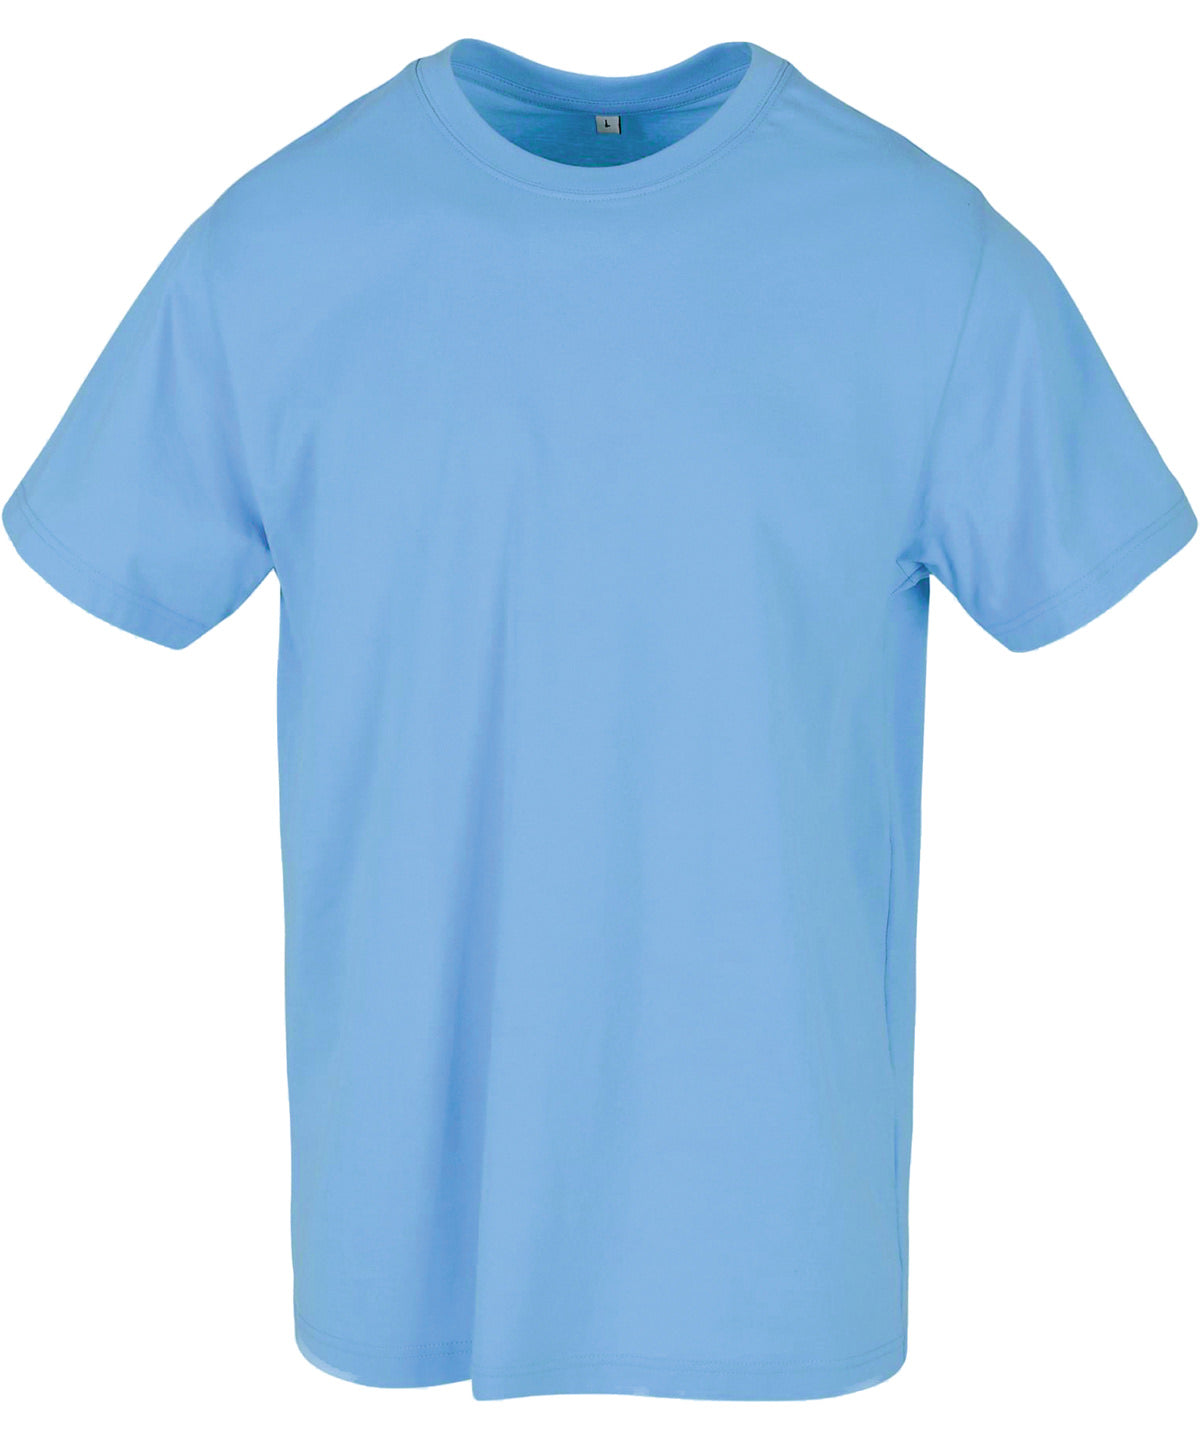 Personalised T-Shirts - Light Blue Build Your Brand T-shirt round-neck